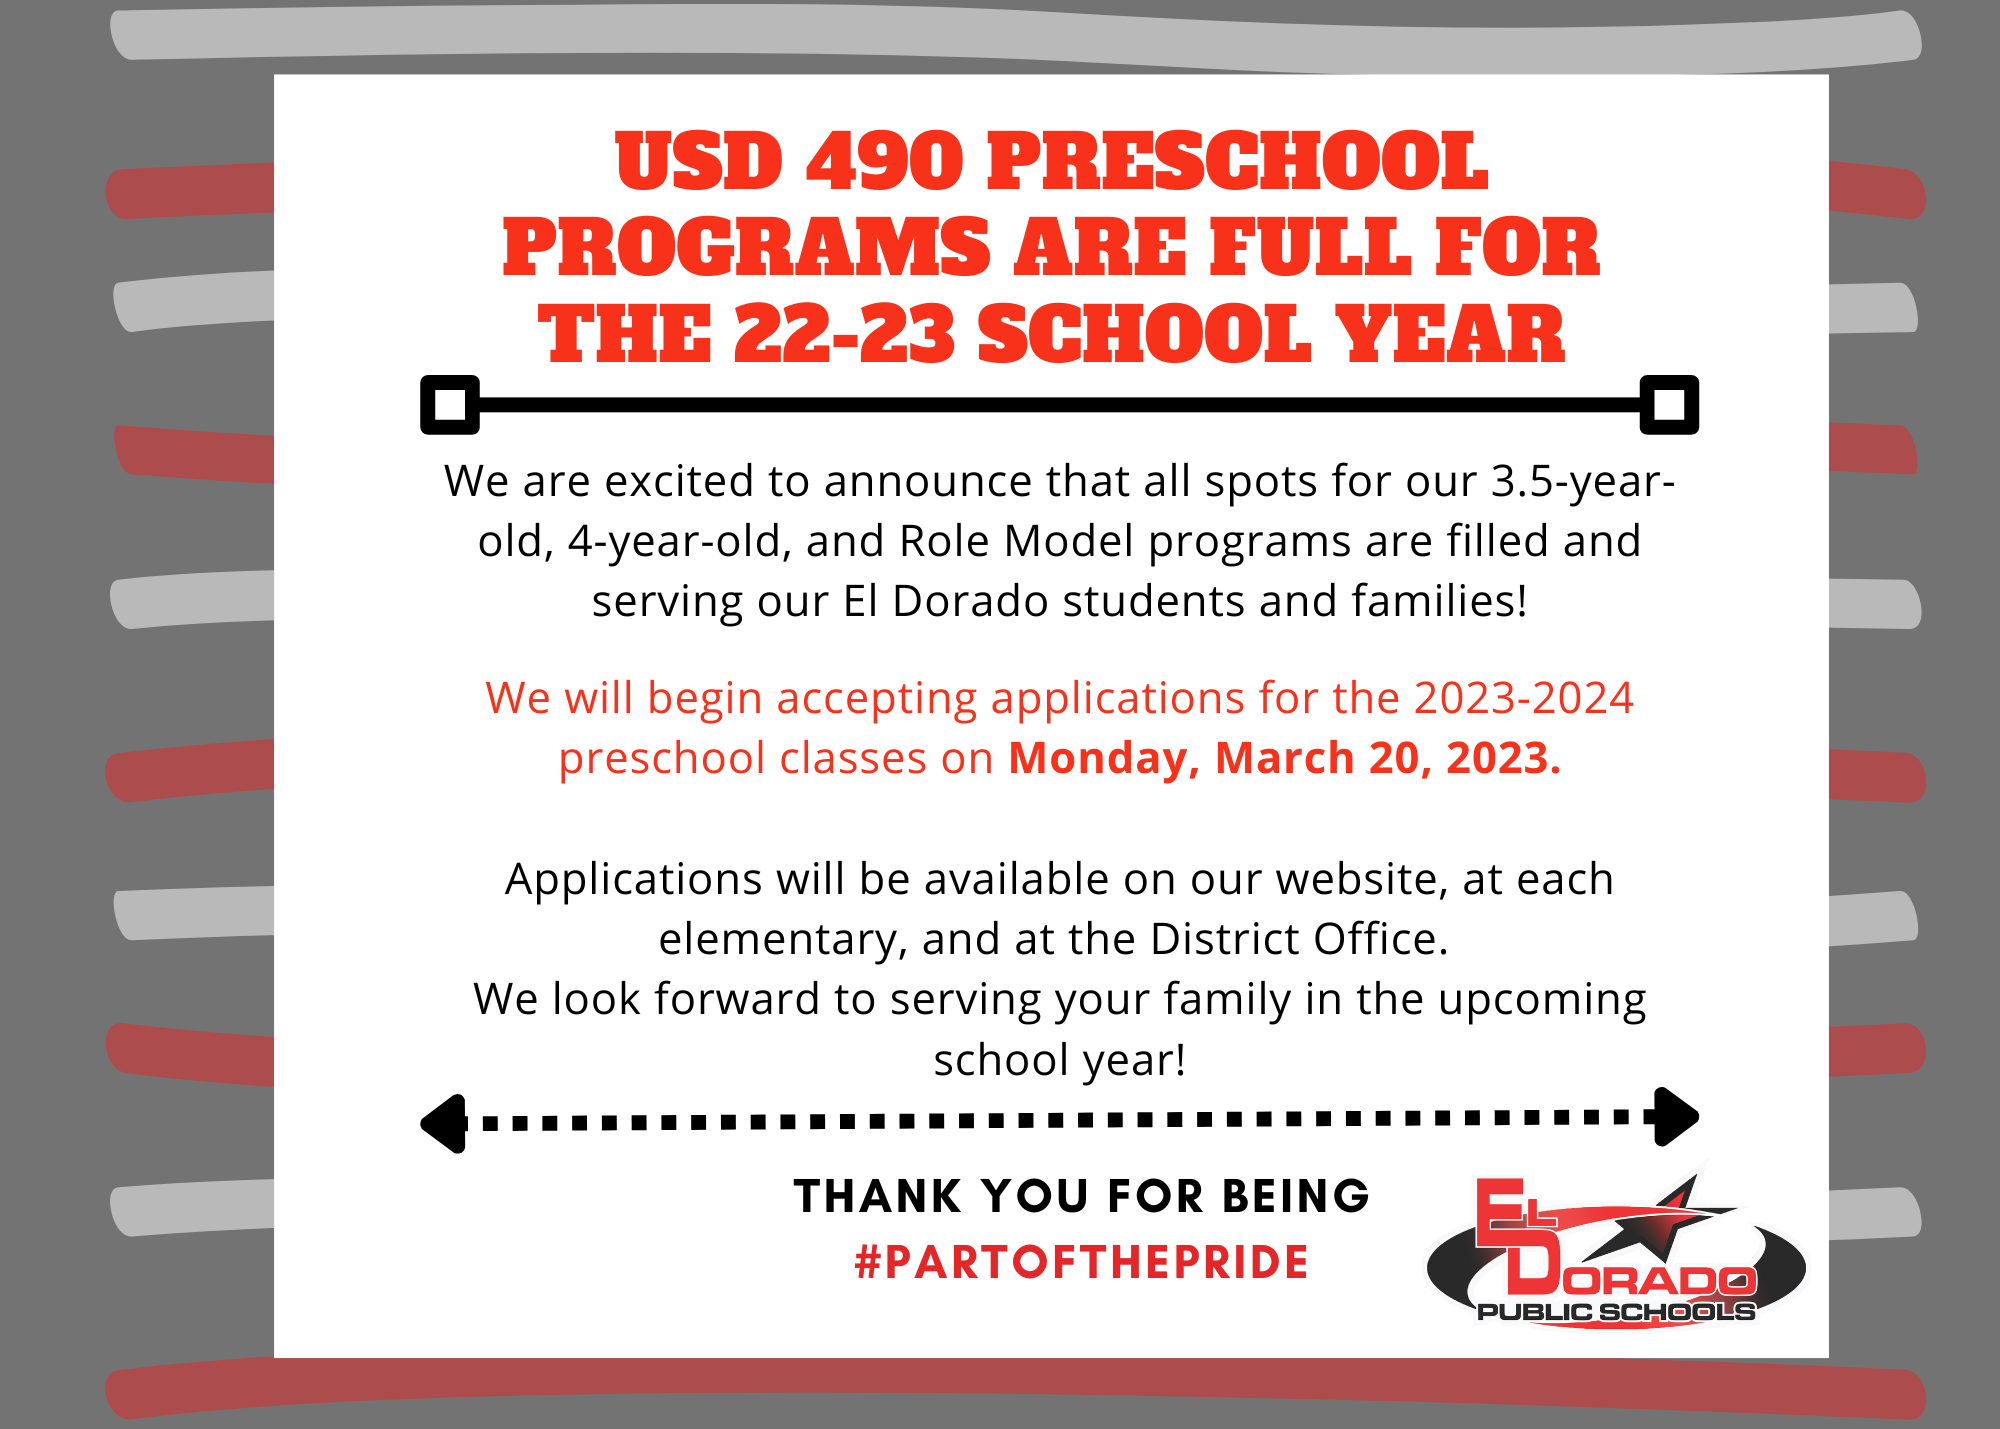 USD 490 Preschool programs are full for the 22-23 school year. We are excited to announce that all spots for our 3.5-year-old, 4-year-old, and Role Model programs are filled and serving our El Dorado students and families!  We will begin accepting applications for the 2023-2024 preschool classes on Monday, March 20, 2023.  Applications will be available on our website, at each elementary, and at the District Office.  We look forward to serving your family in the upcoming school year! Thank you for being #PartOfThePride